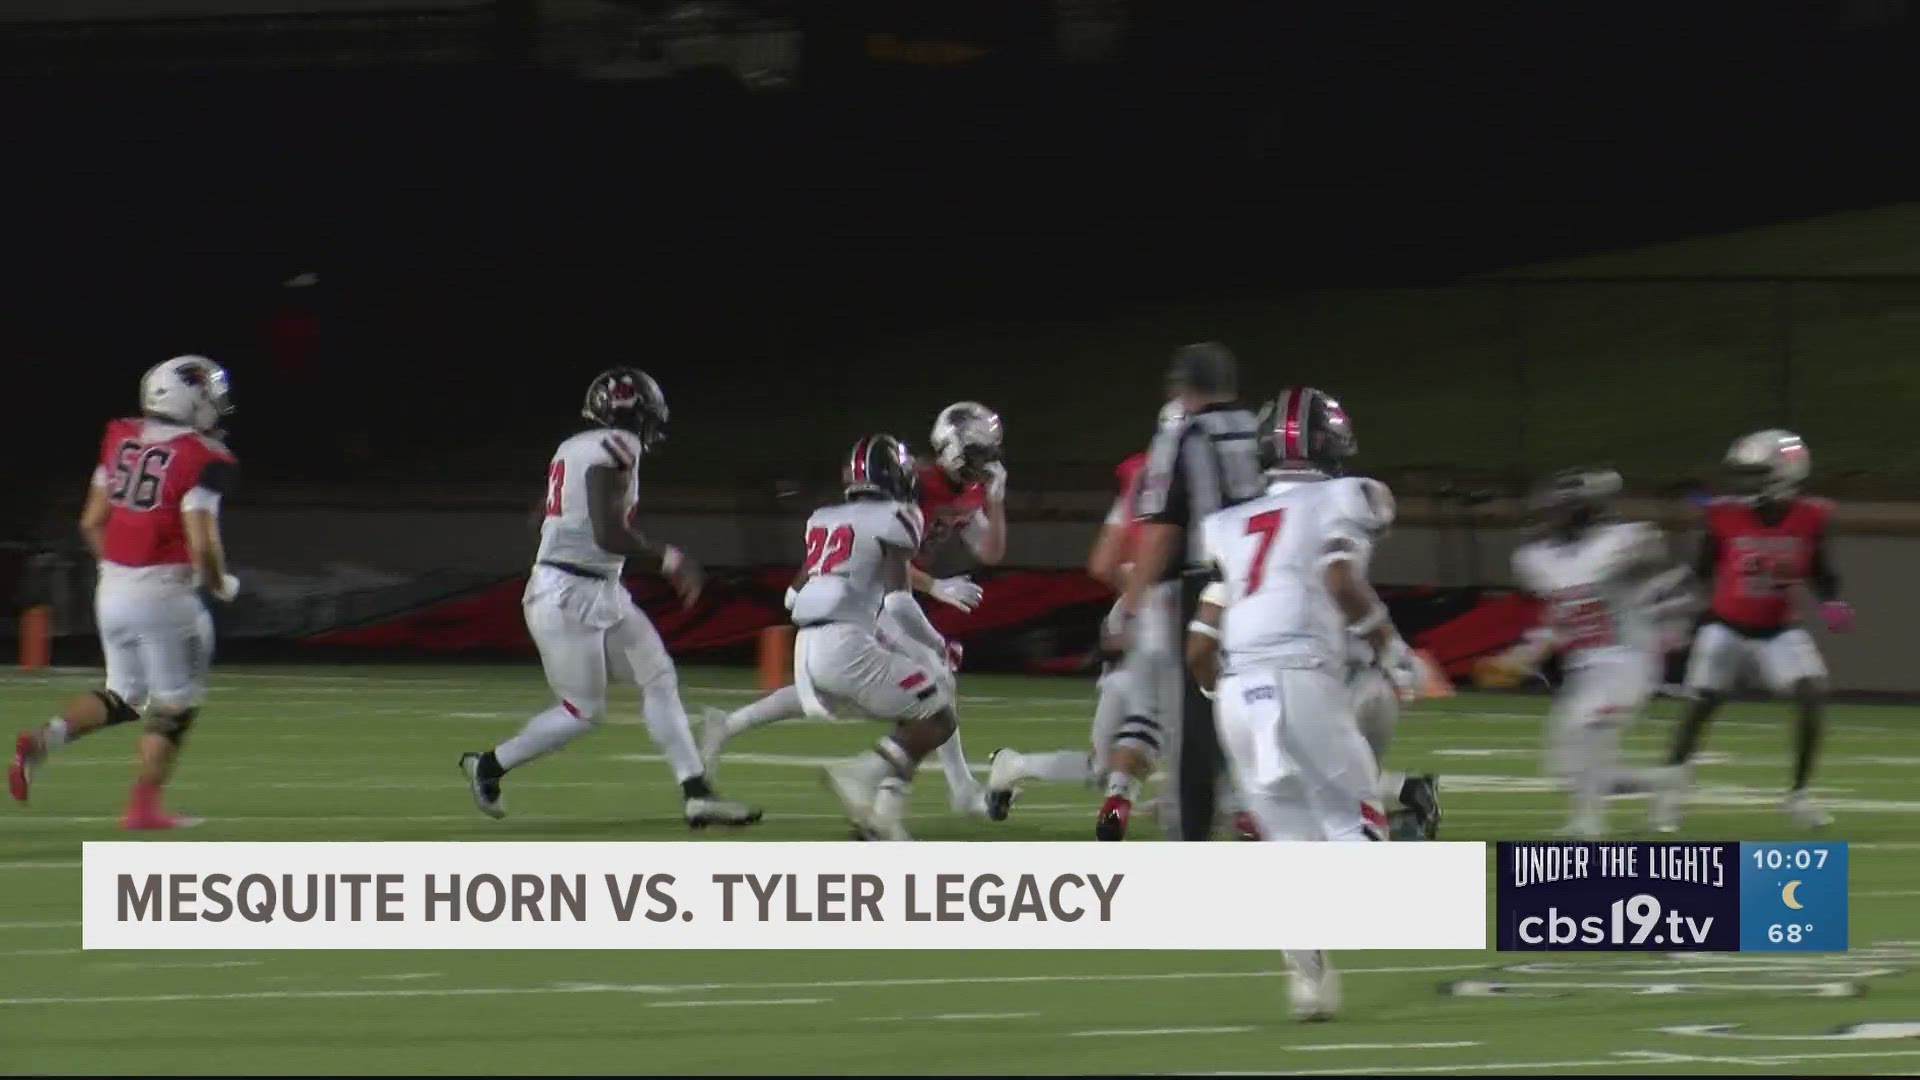 UNDER THE LIGHTS: Tyler Legacy inches by Mesquite Horn 10-7